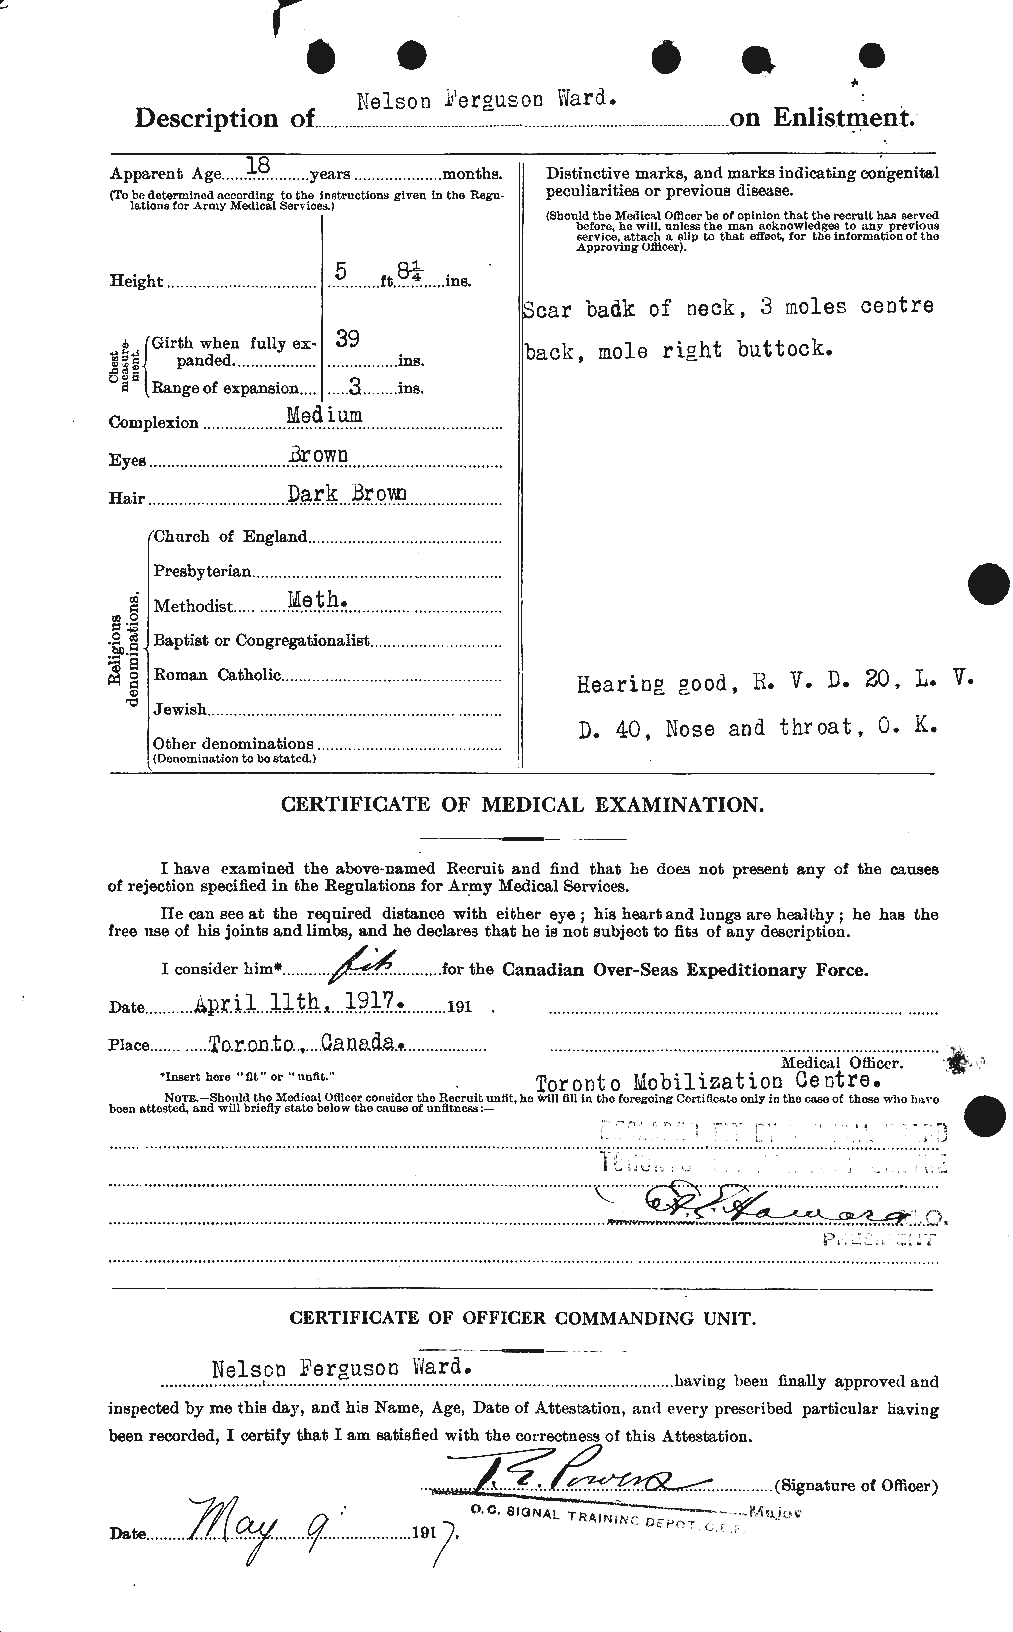 Personnel Records of the First World War - CEF 659609b